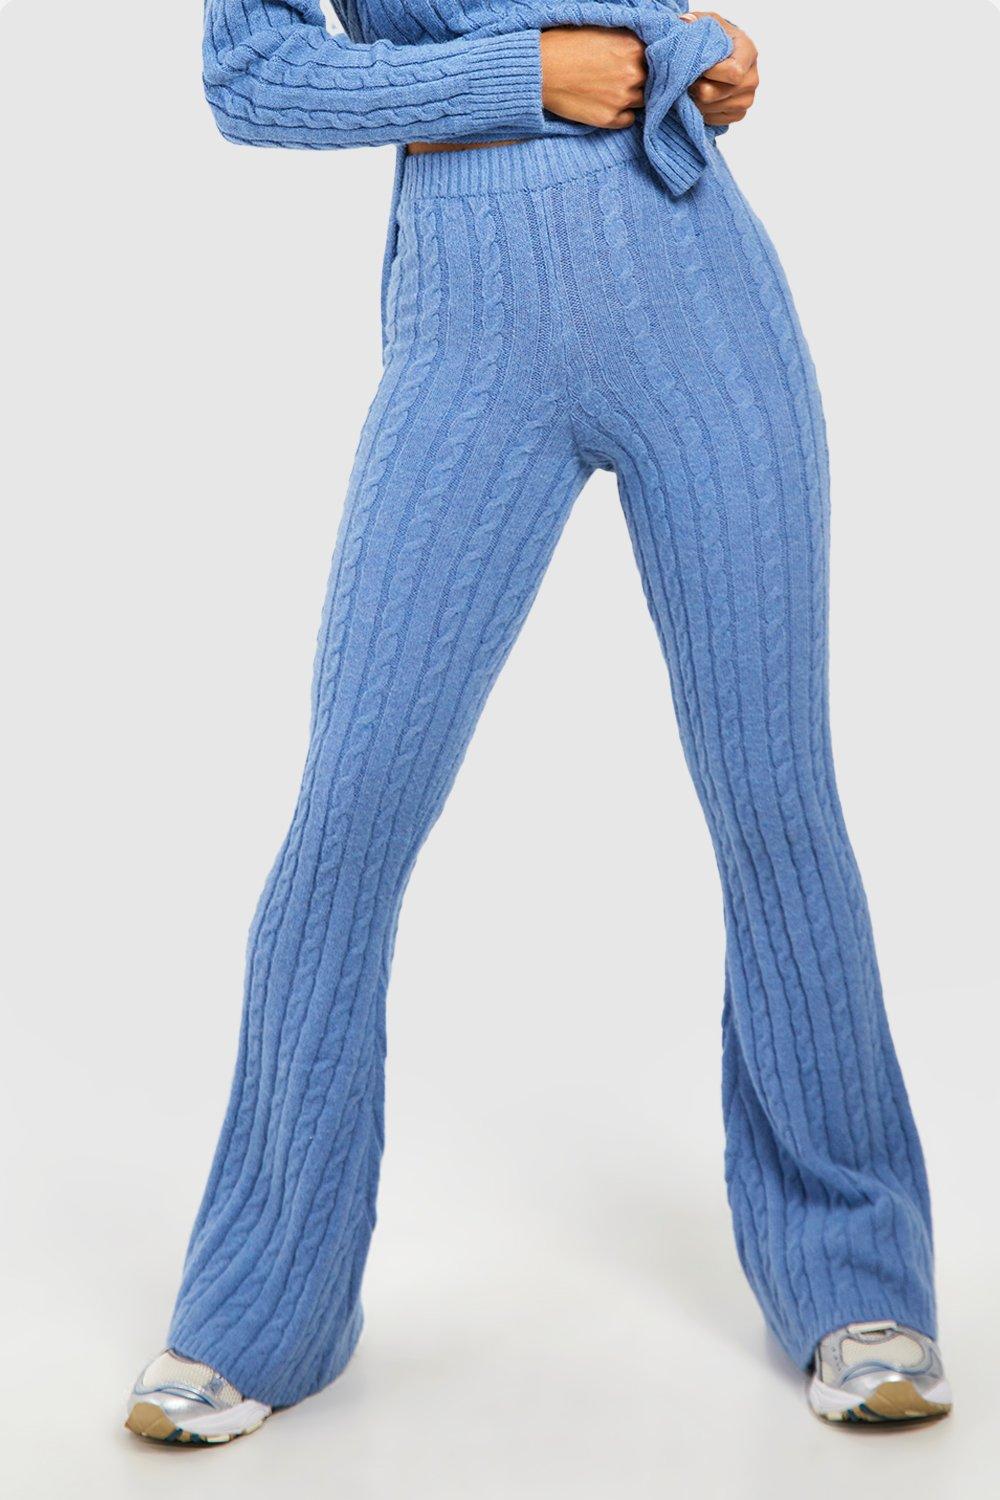 Women's Soft Cable Knit Flare Trousers